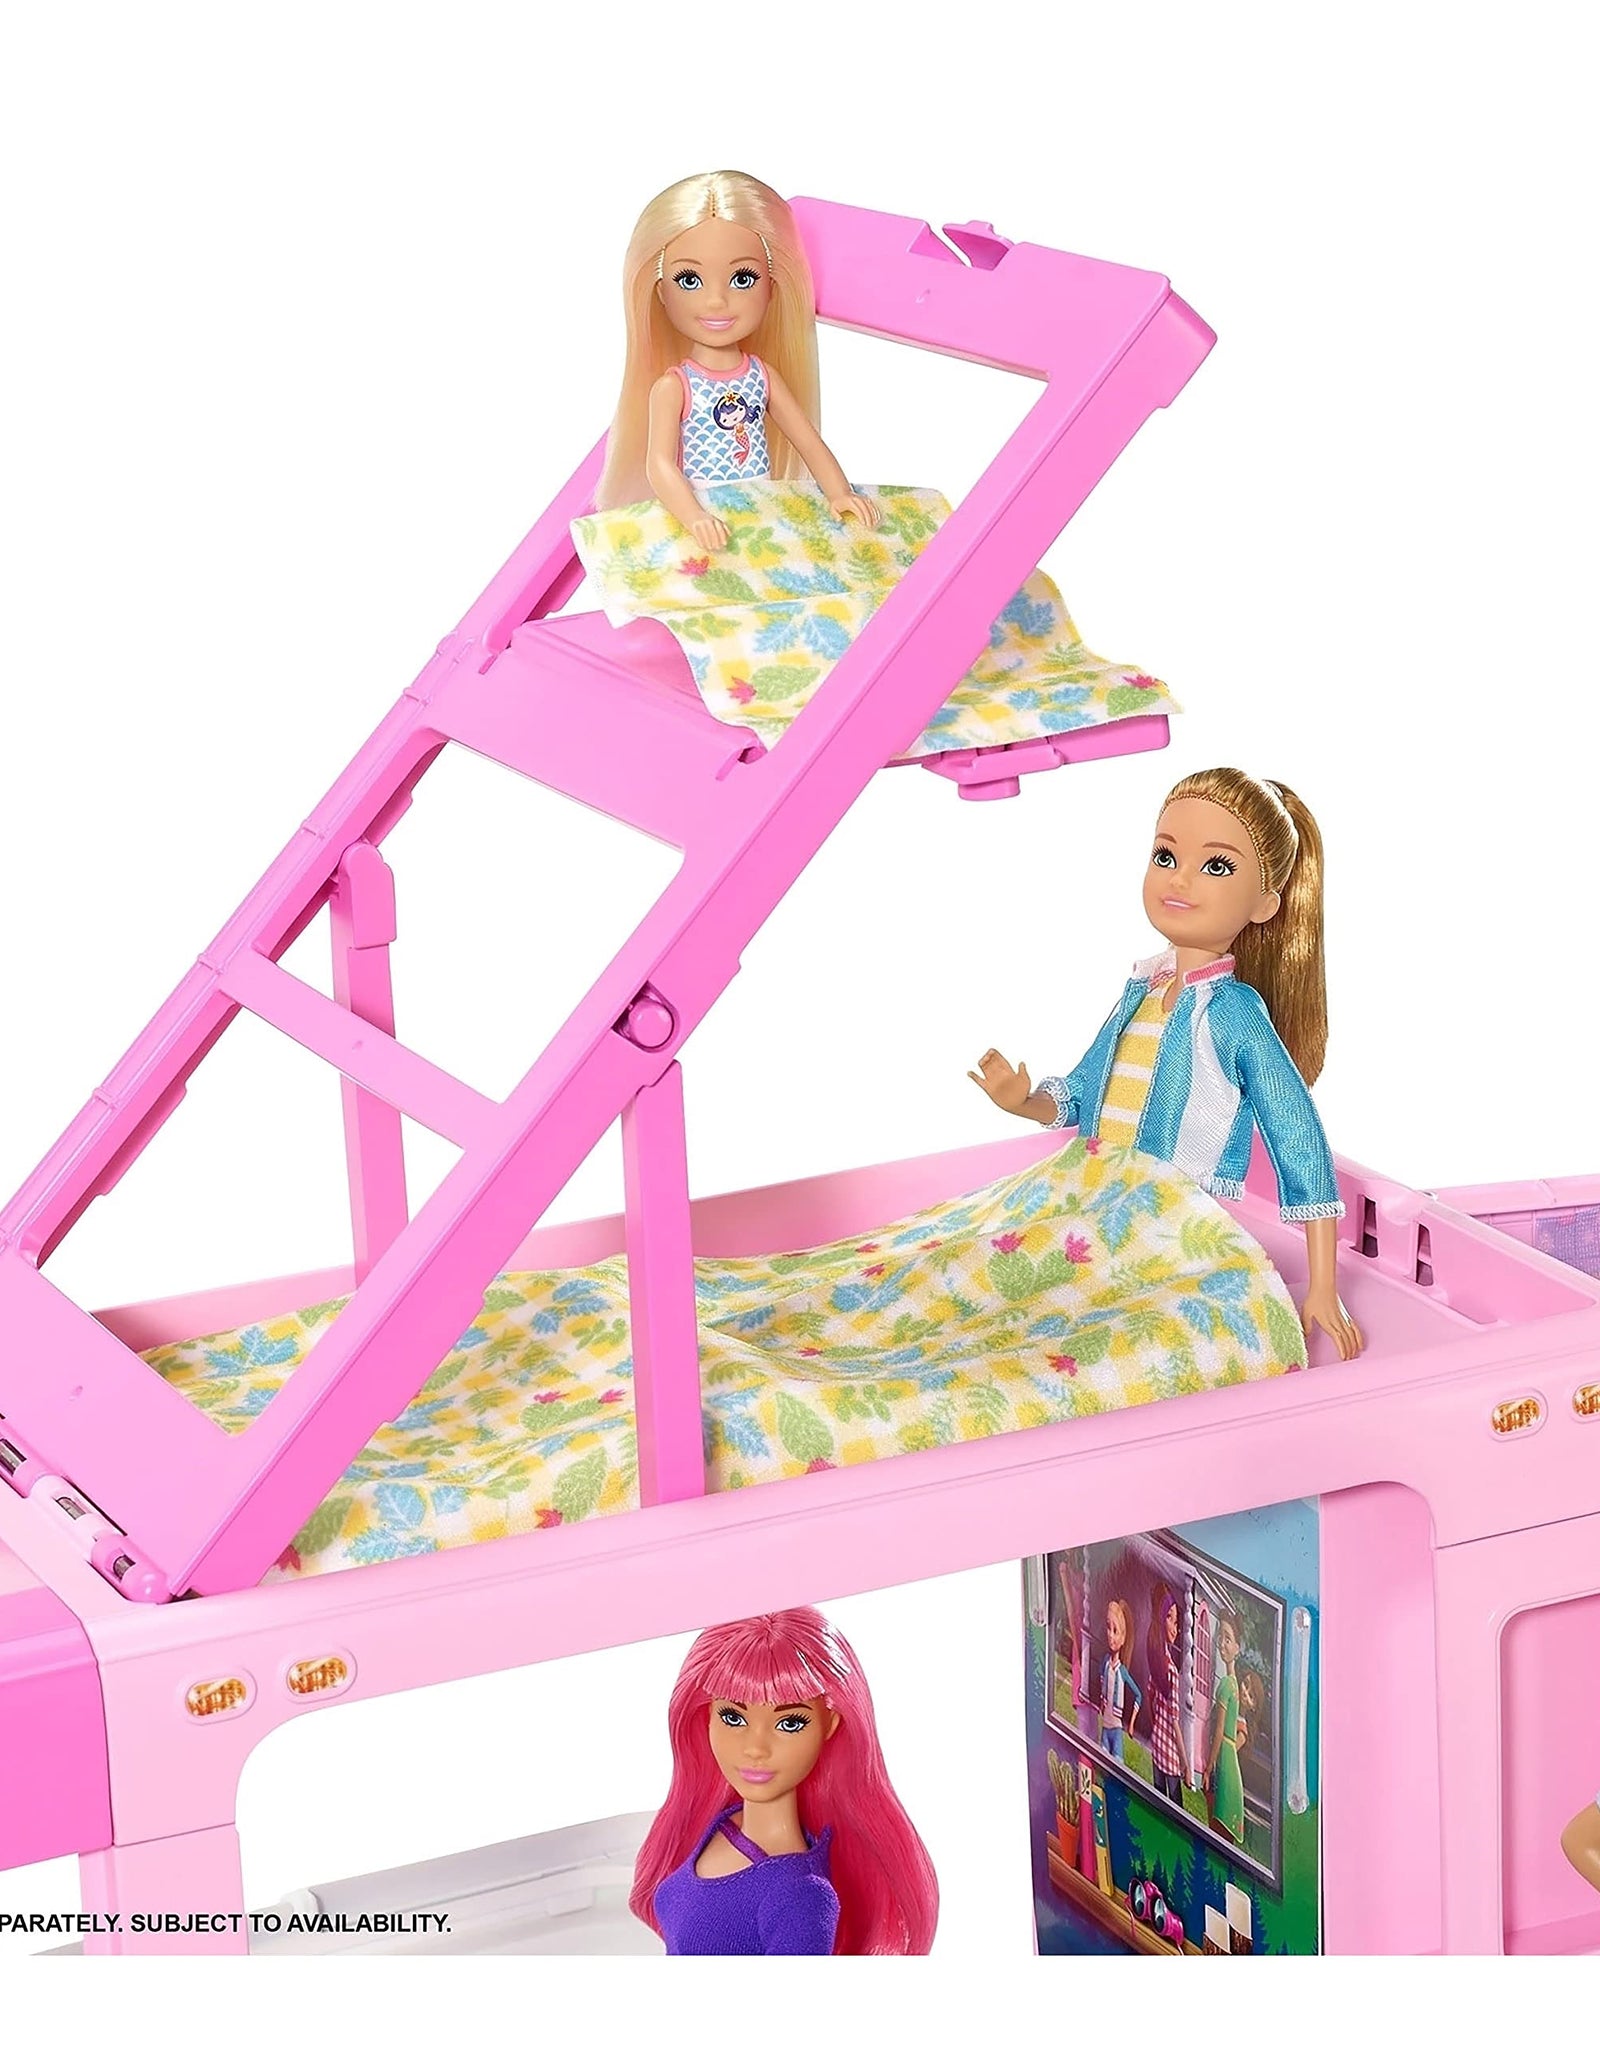 Barbie 3-in-1 DreamCamper Vehicle, approx. 3-ft, Transforming Camper with Pool, Truck, Boat and 50 Accessories, Makes a Great Gift for 3 to 7 Year Olds